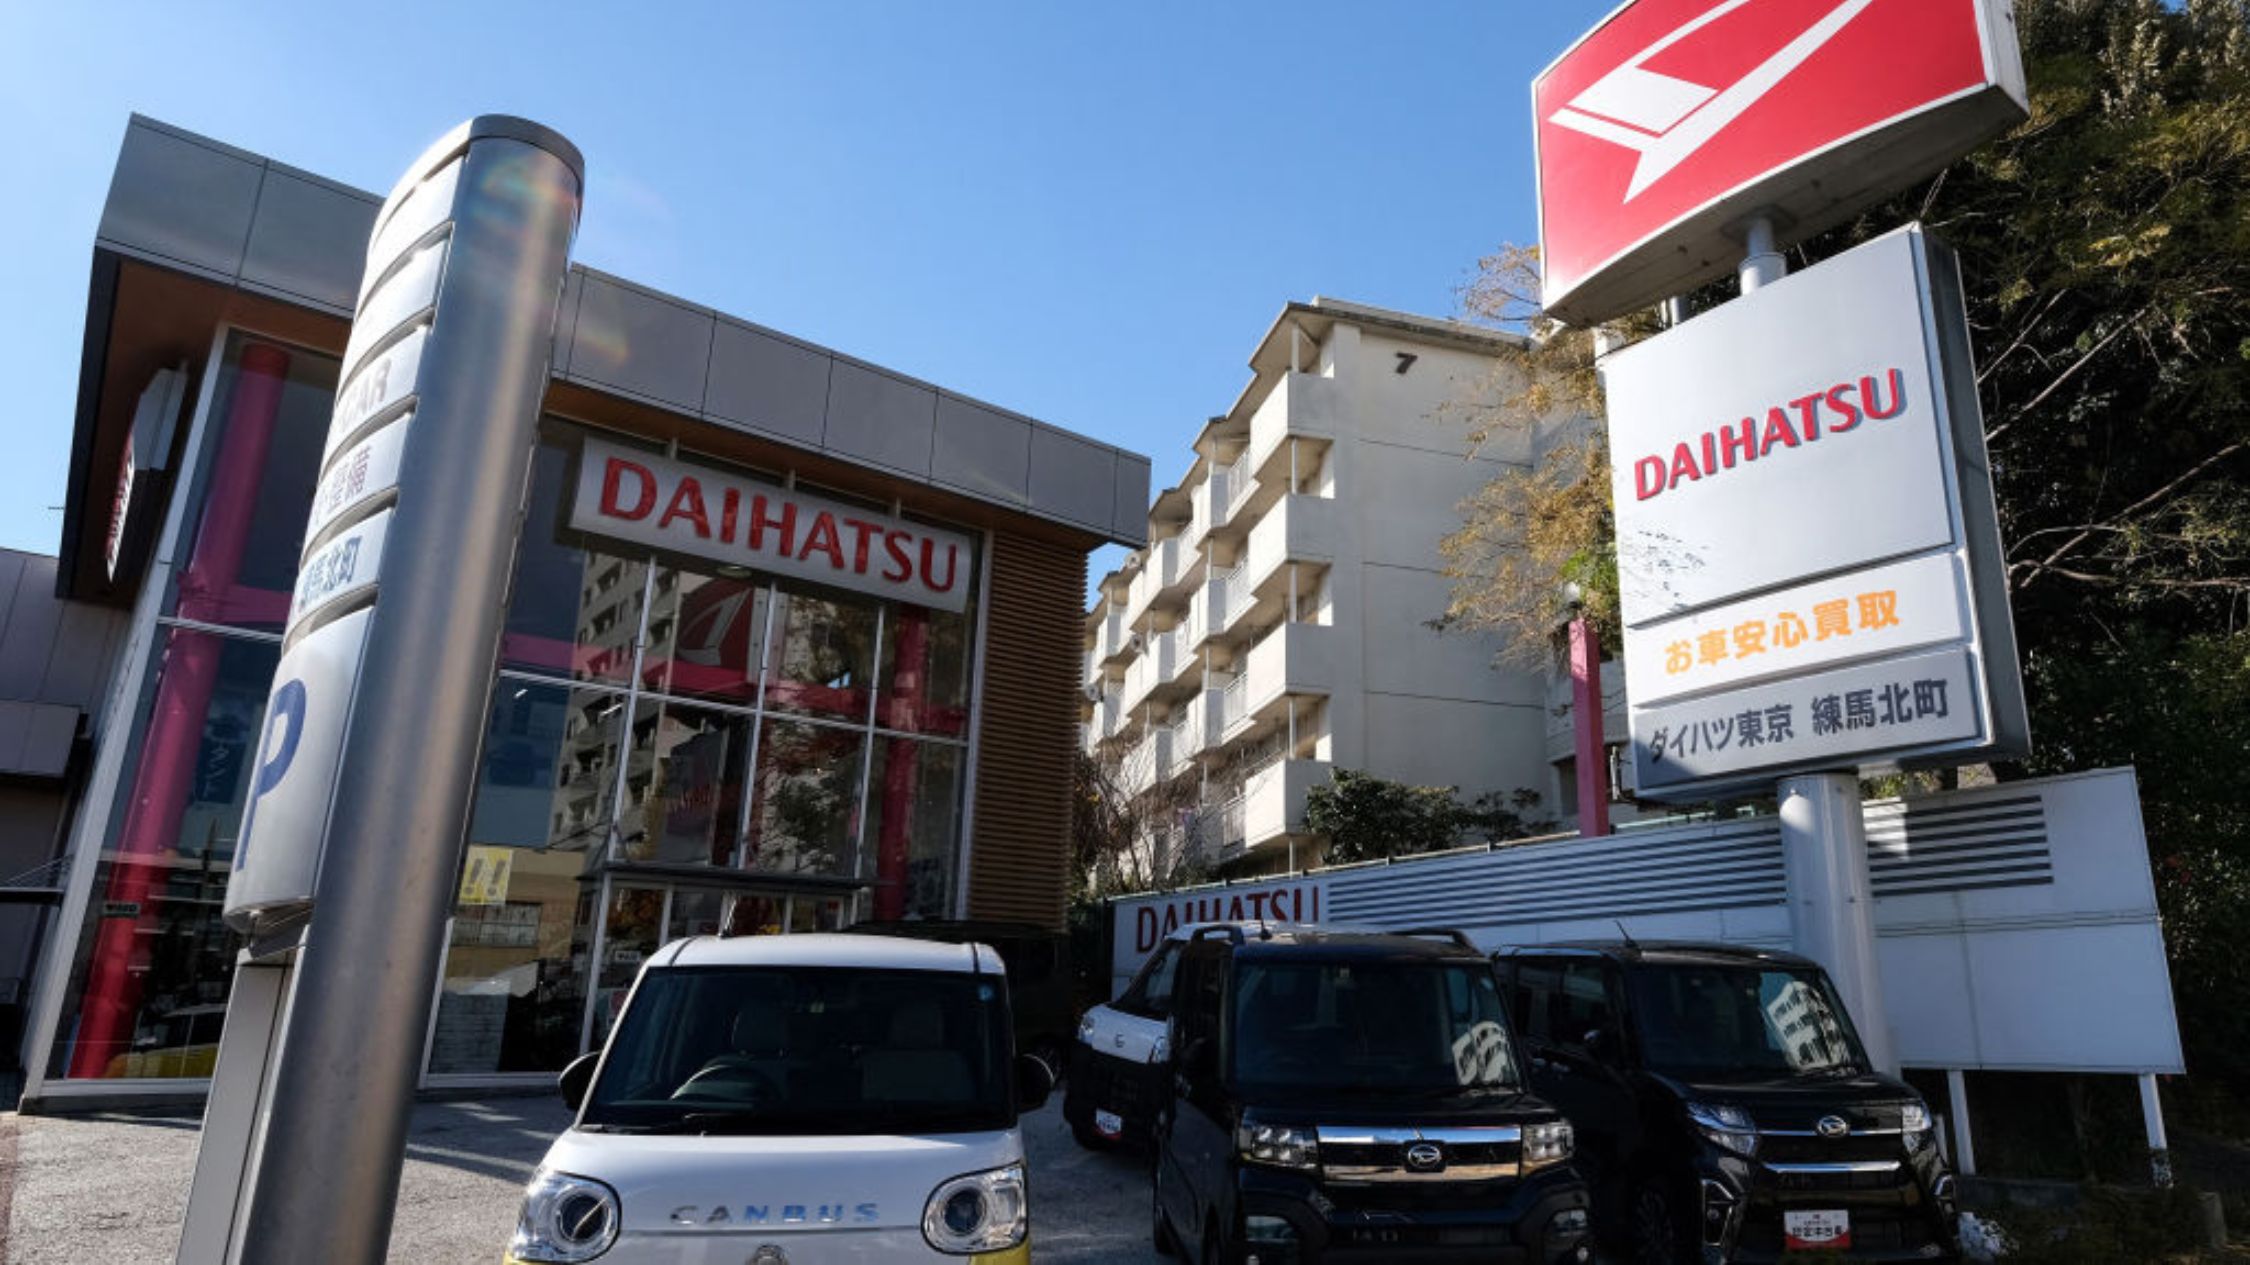 What happened to Daihatsu?  Which models are affected?